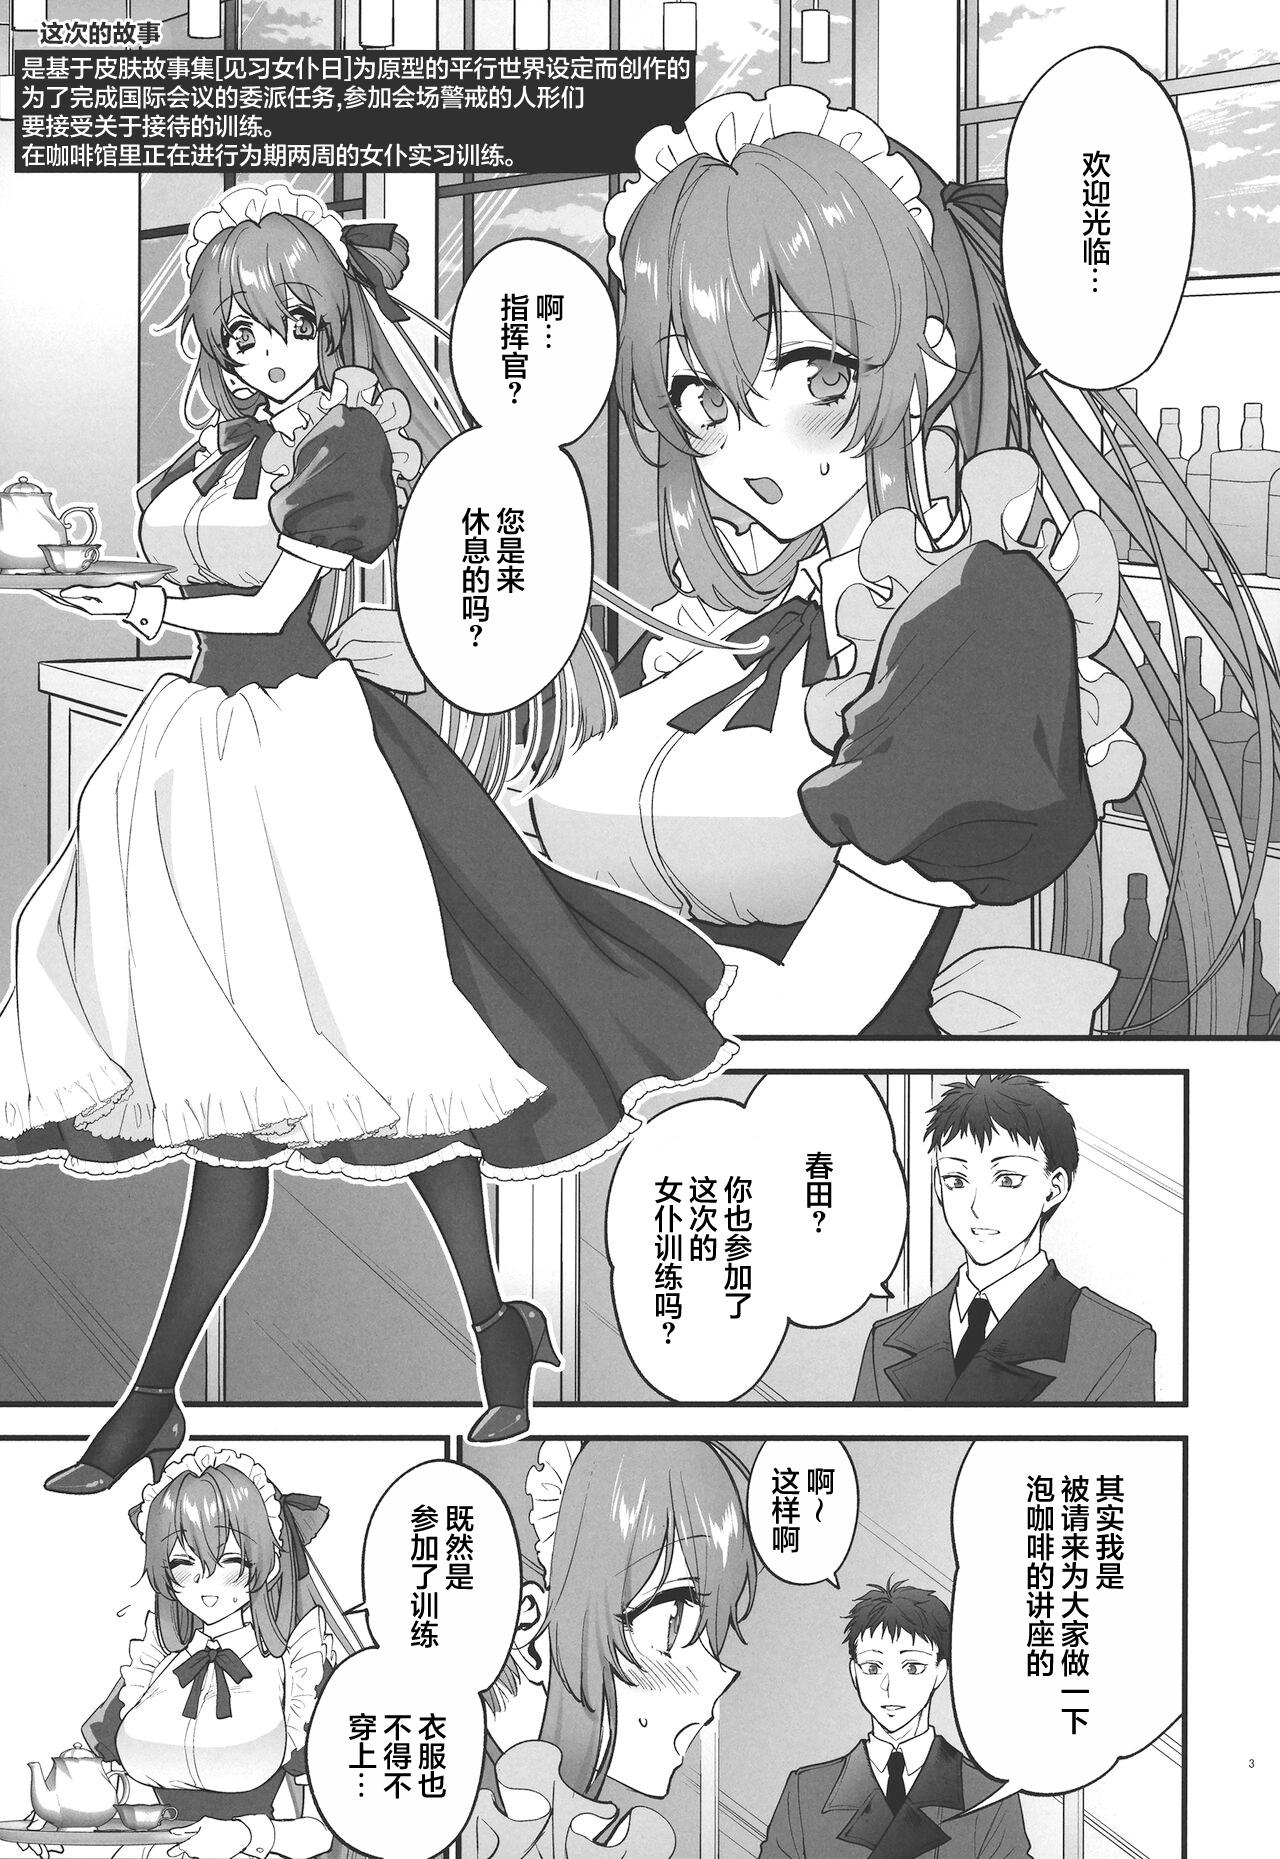 Perrito Make me Yours - Girls frontline Beauty - Page 2